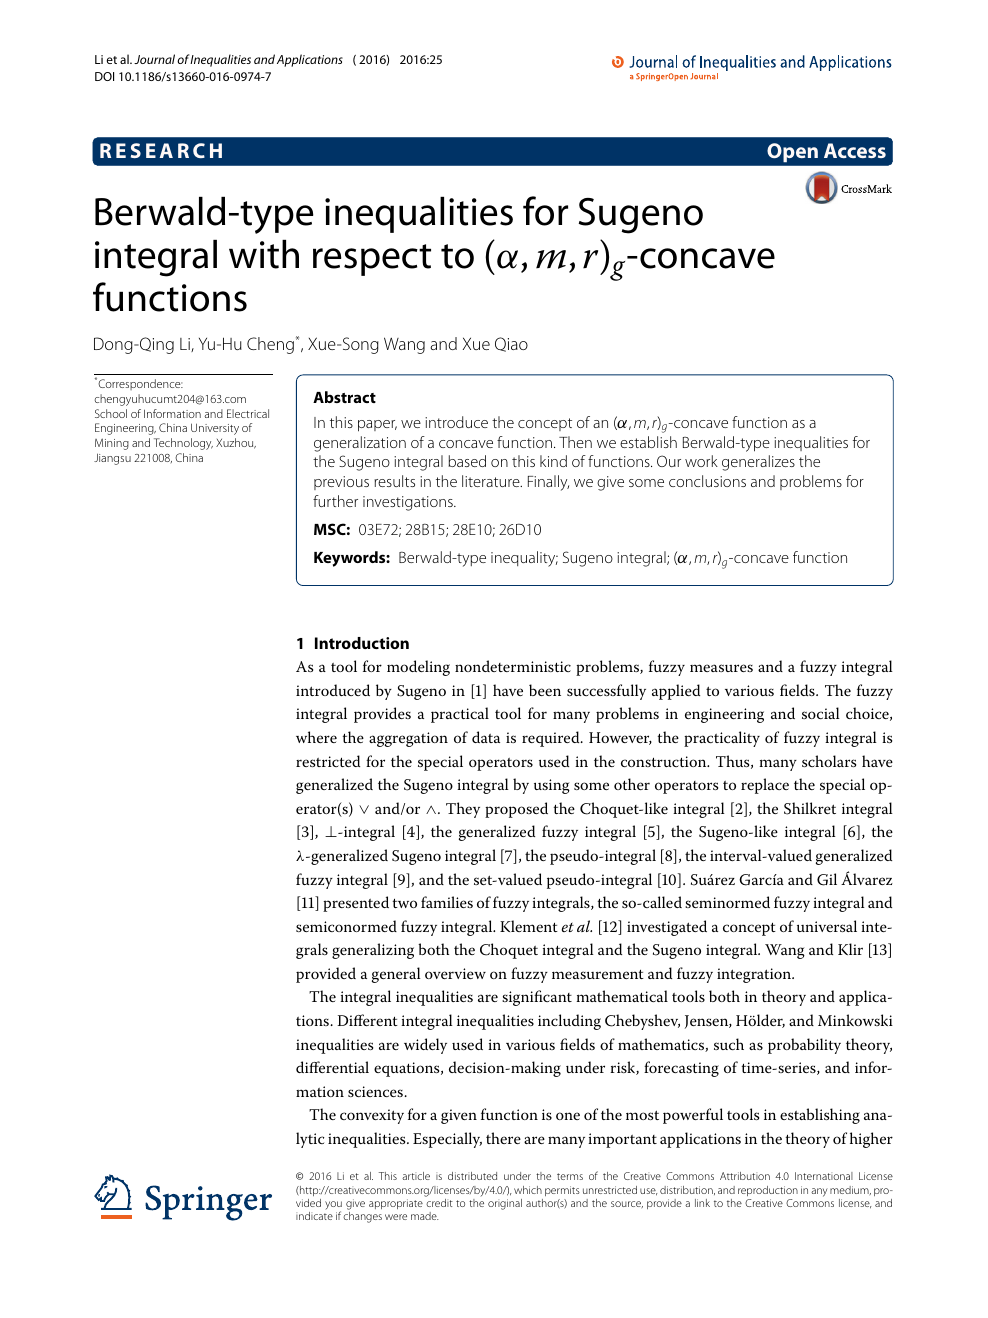 Berwald Type Inequalities For Sugeno Integral With Respect To A M R G Alpha M R G Concave Functions Topic Of Research Paper In Mathematics Download Scholarly Article